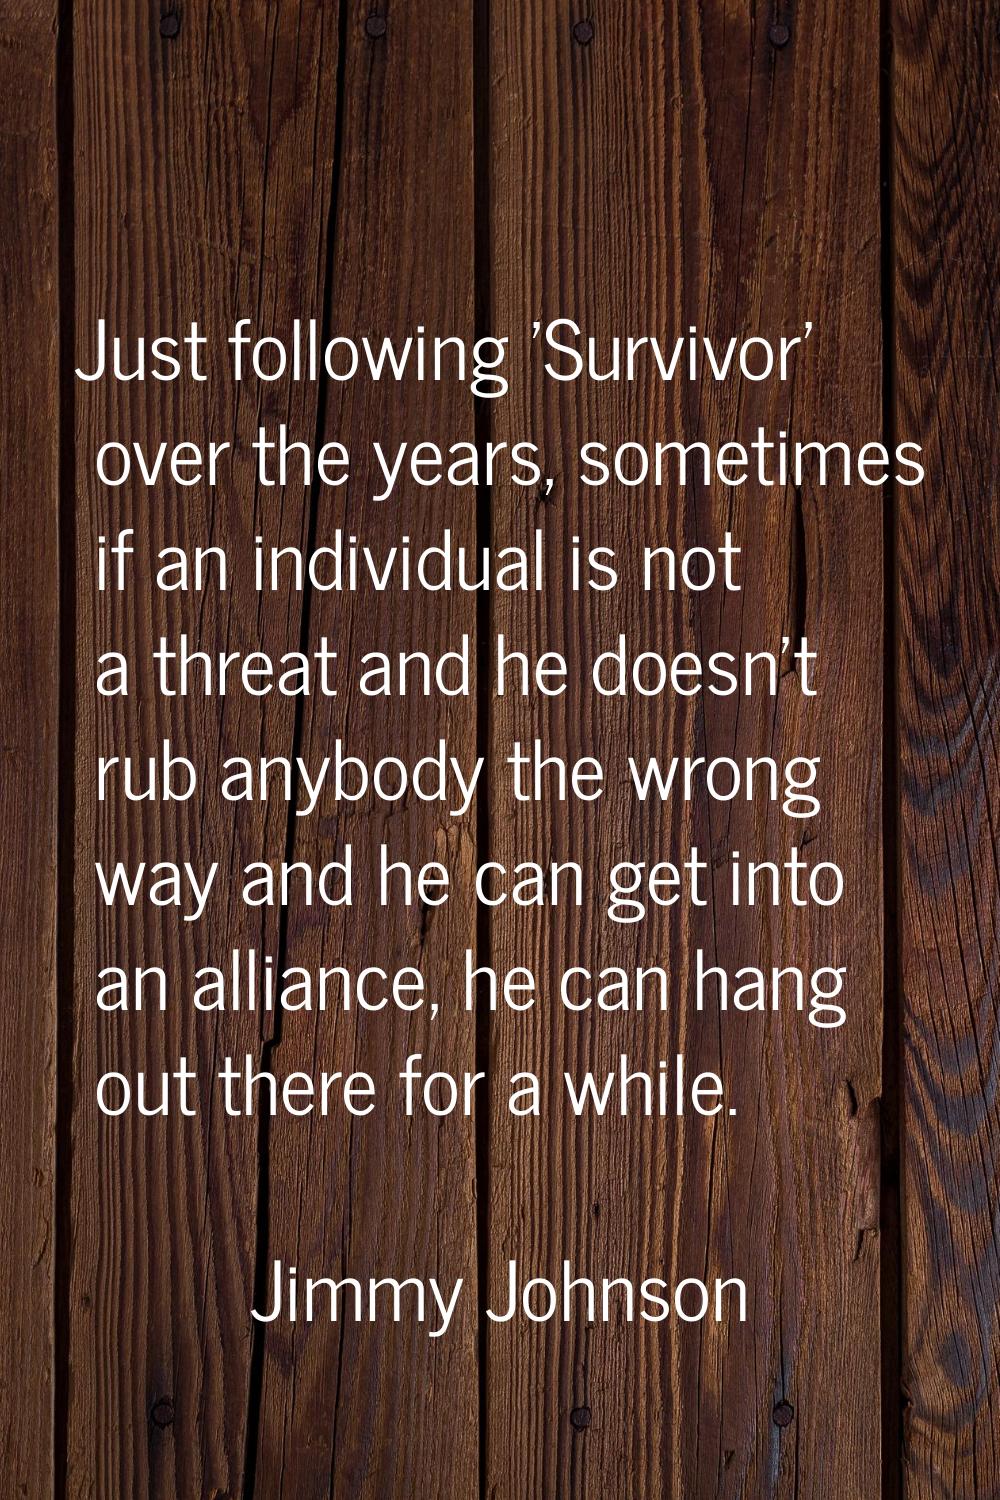 Just following 'Survivor' over the years, sometimes if an individual is not a threat and he doesn't